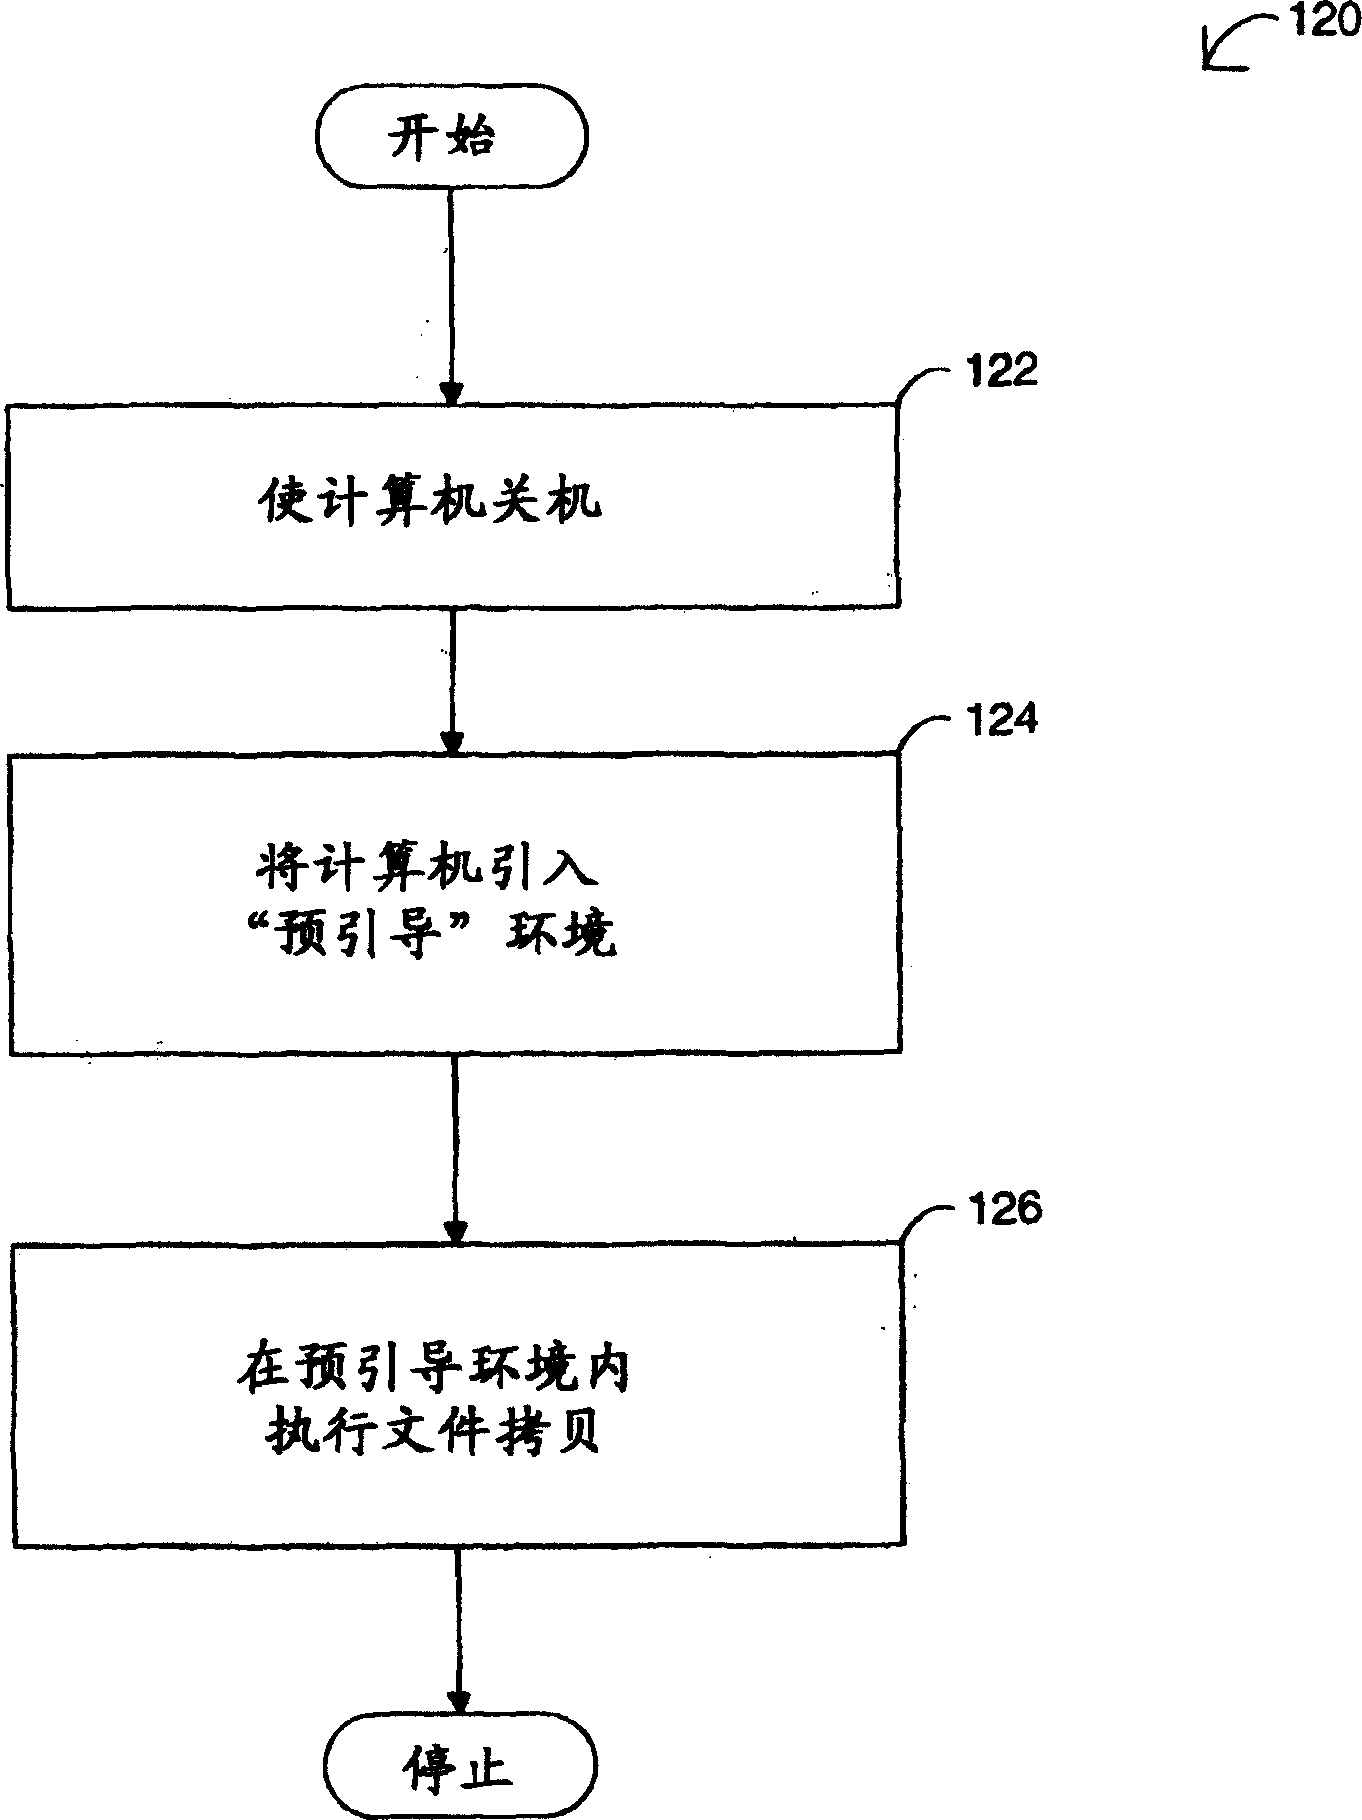 Method and system of accessing at least one target file in a computer system